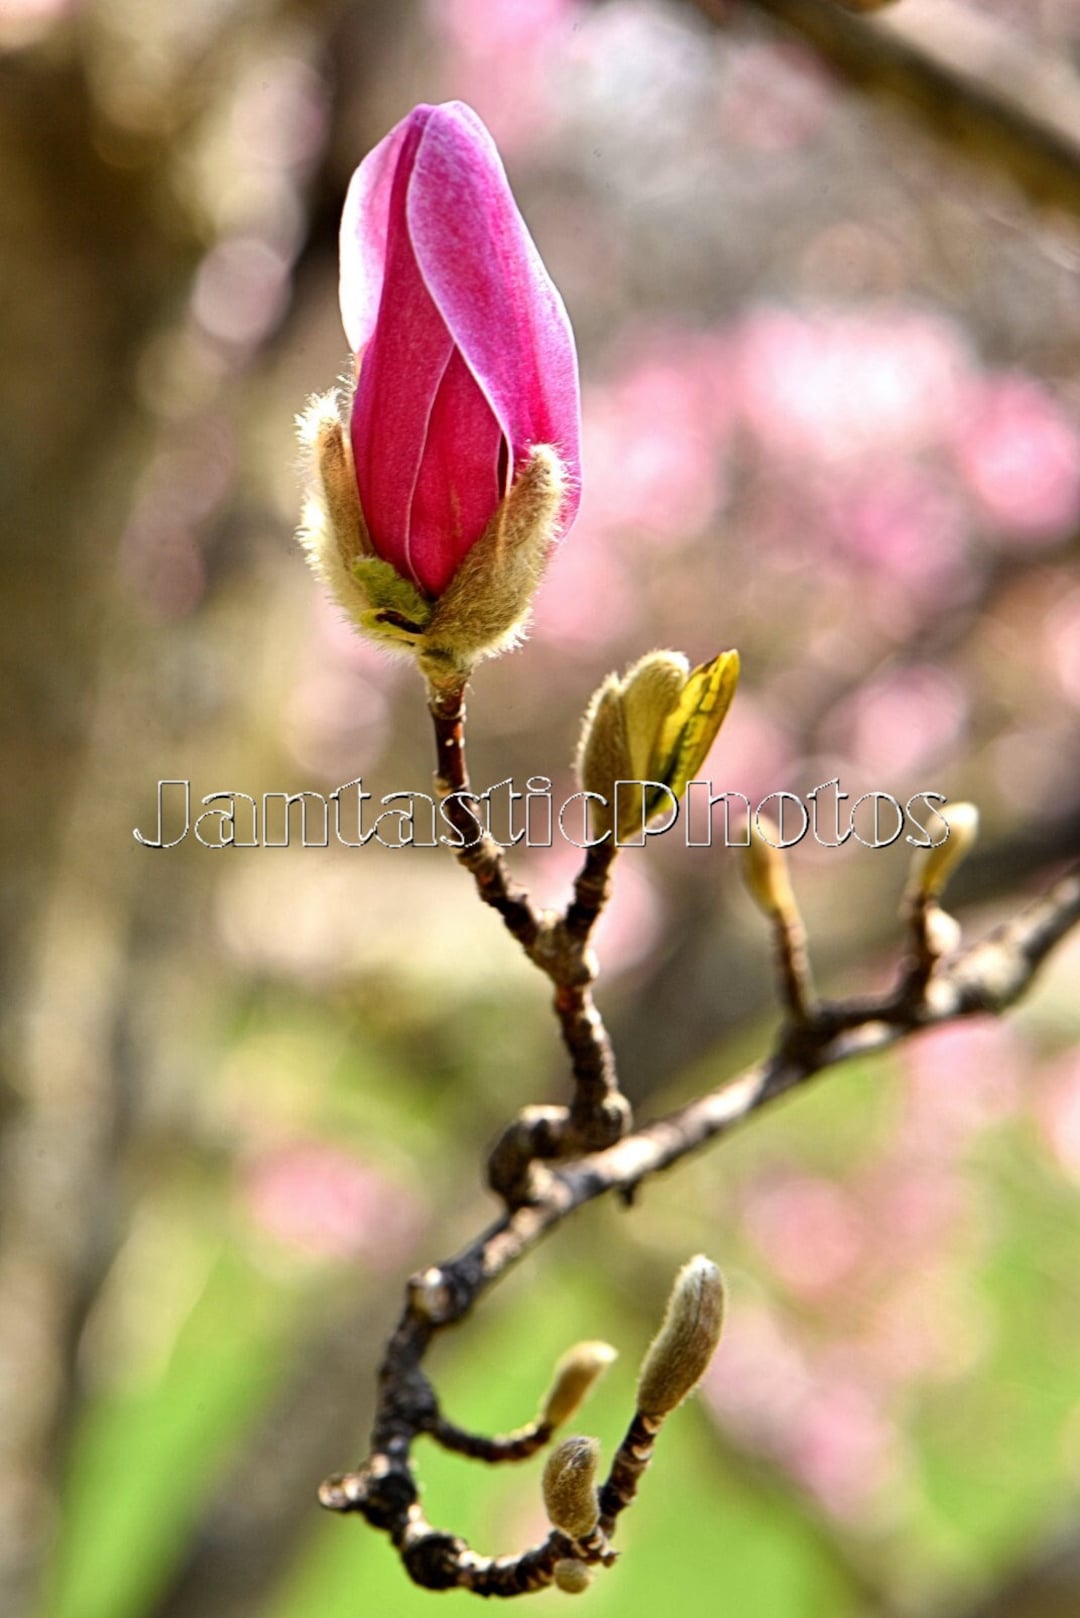 Magnolia Blossom For Beauty And Buddha For Zen Breathing Stock Photo -  Download Image Now - iStock